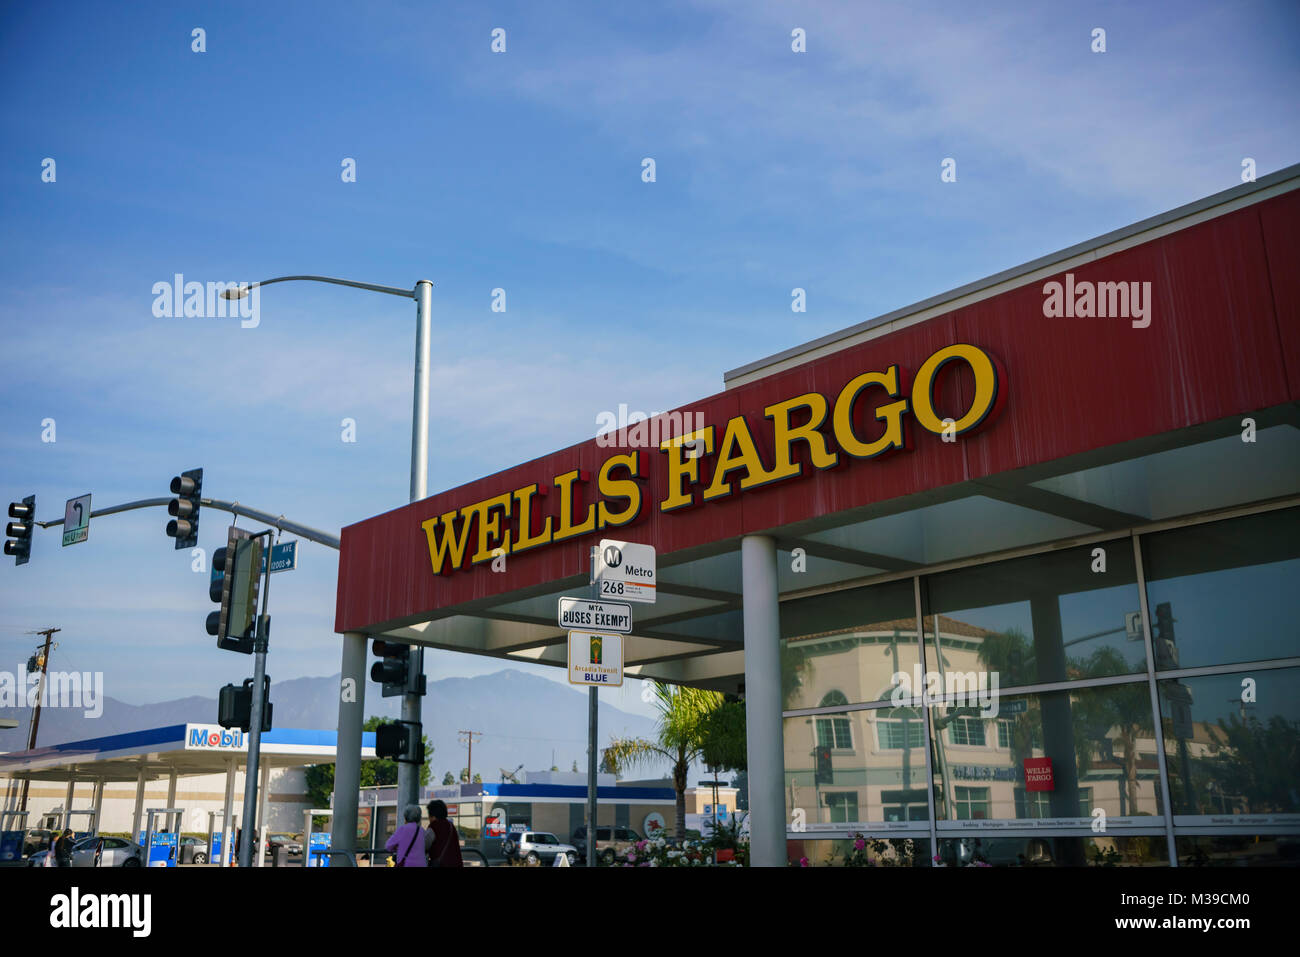 Los Angeles, JAN 7: Exterior view of the famous Wells Fargo Bank on JAN 7, 2018 at Los Angeles, California Stock Photo